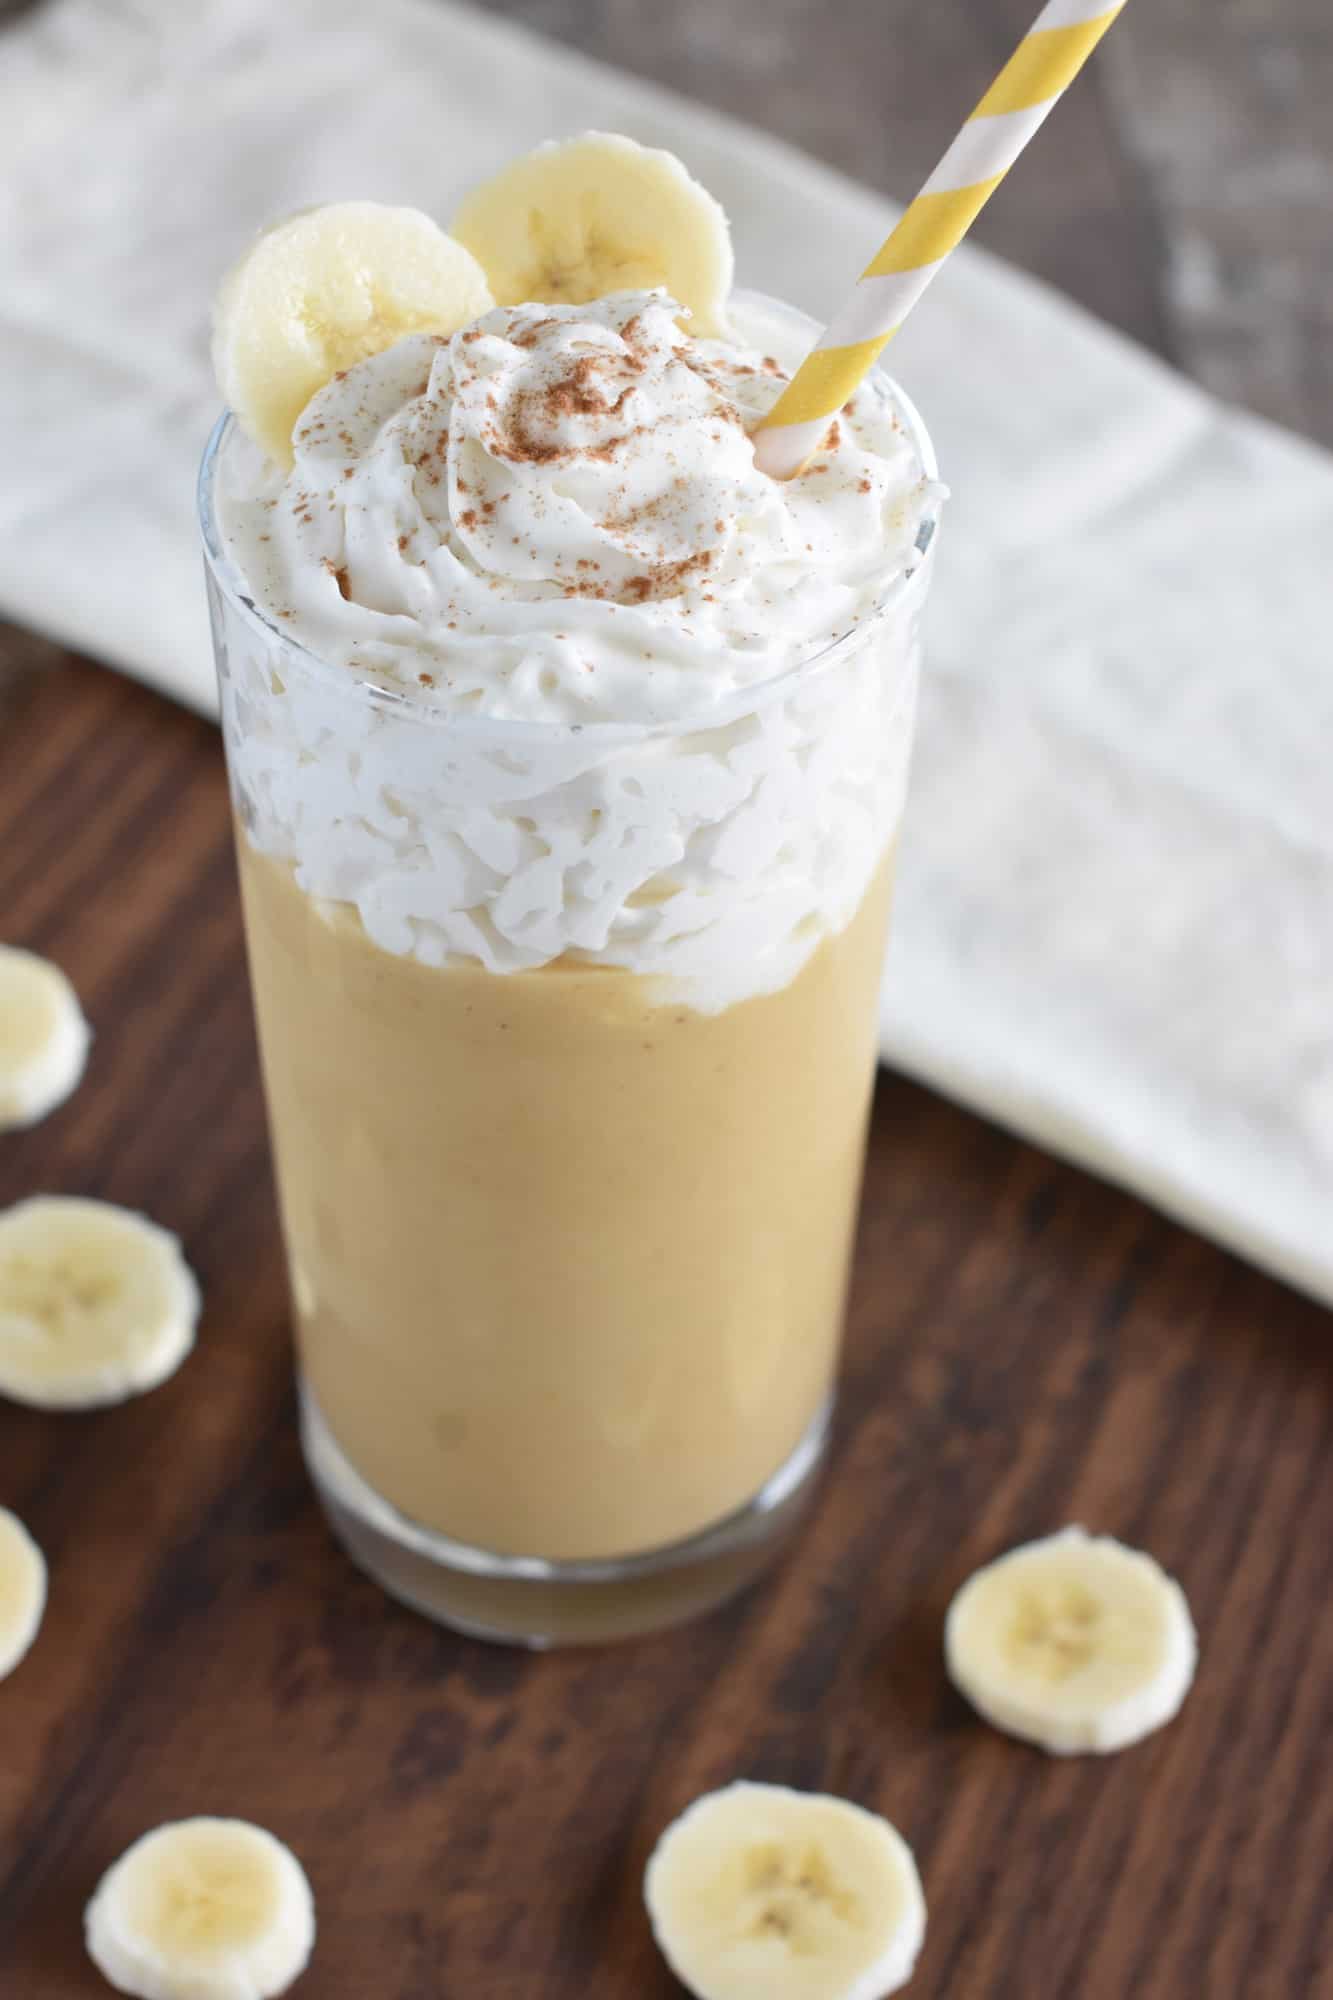 smoothie with non-dairy whipped topping, cinnamon, banana slices and a straw